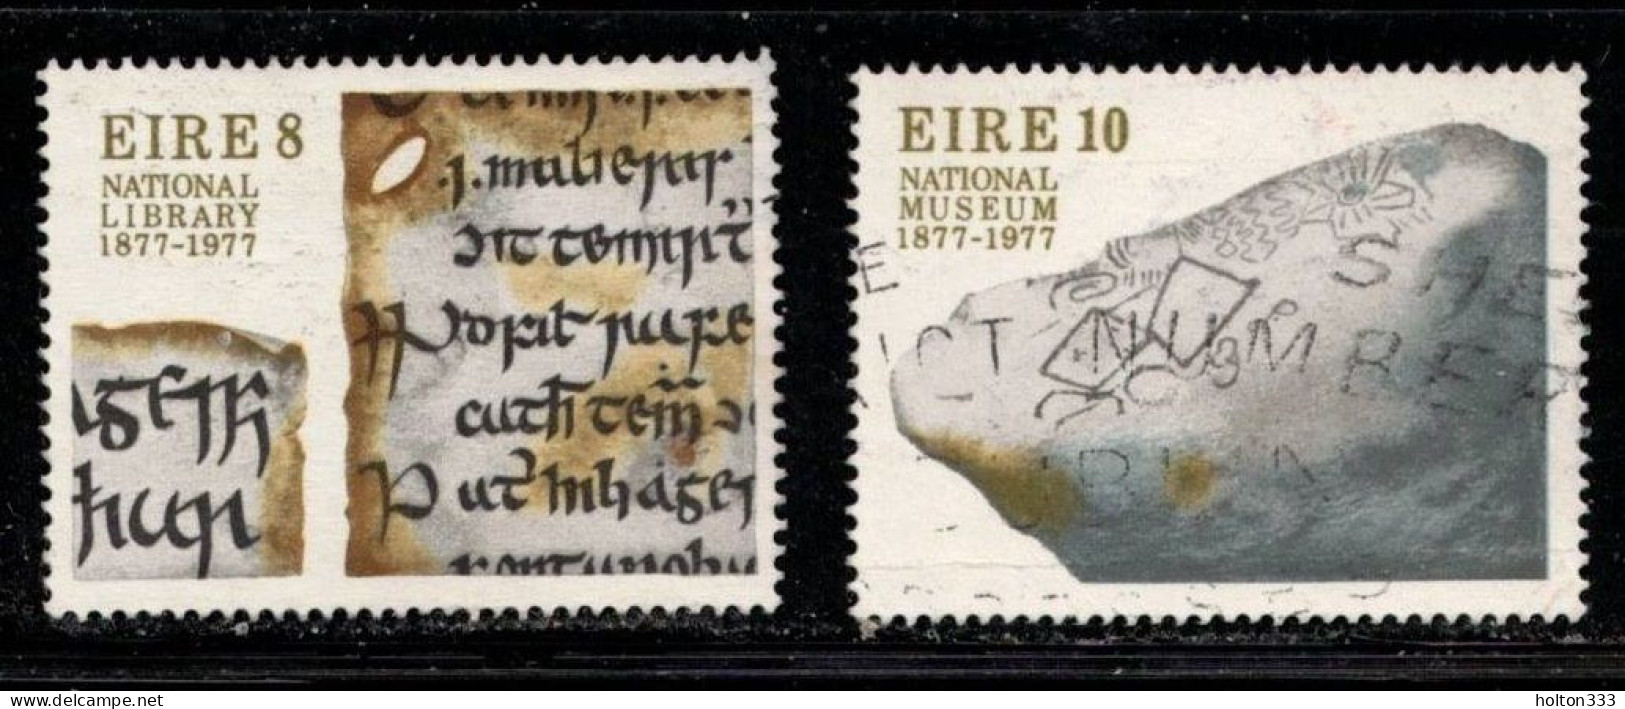 IRELAND Scott # 411-12 Used - Centenaries Of The National Library & Museum - Used Stamps